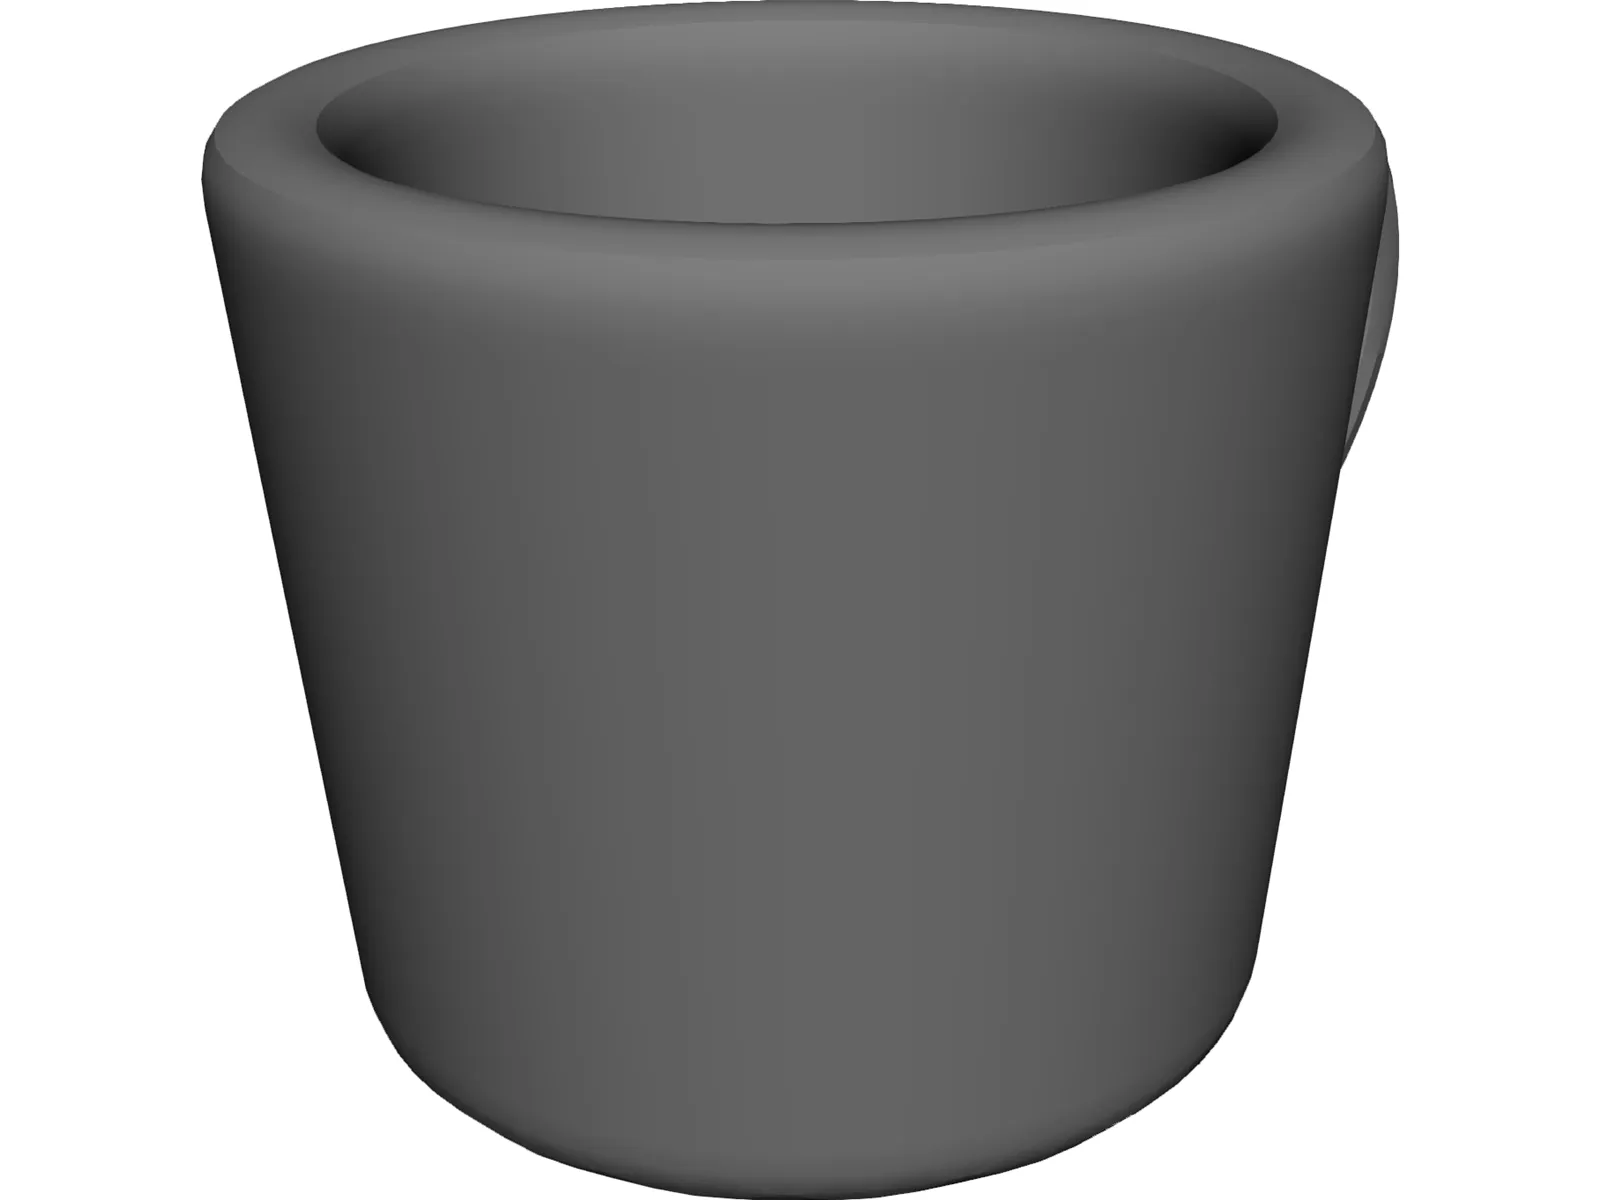 Coffee Cup 3D Model